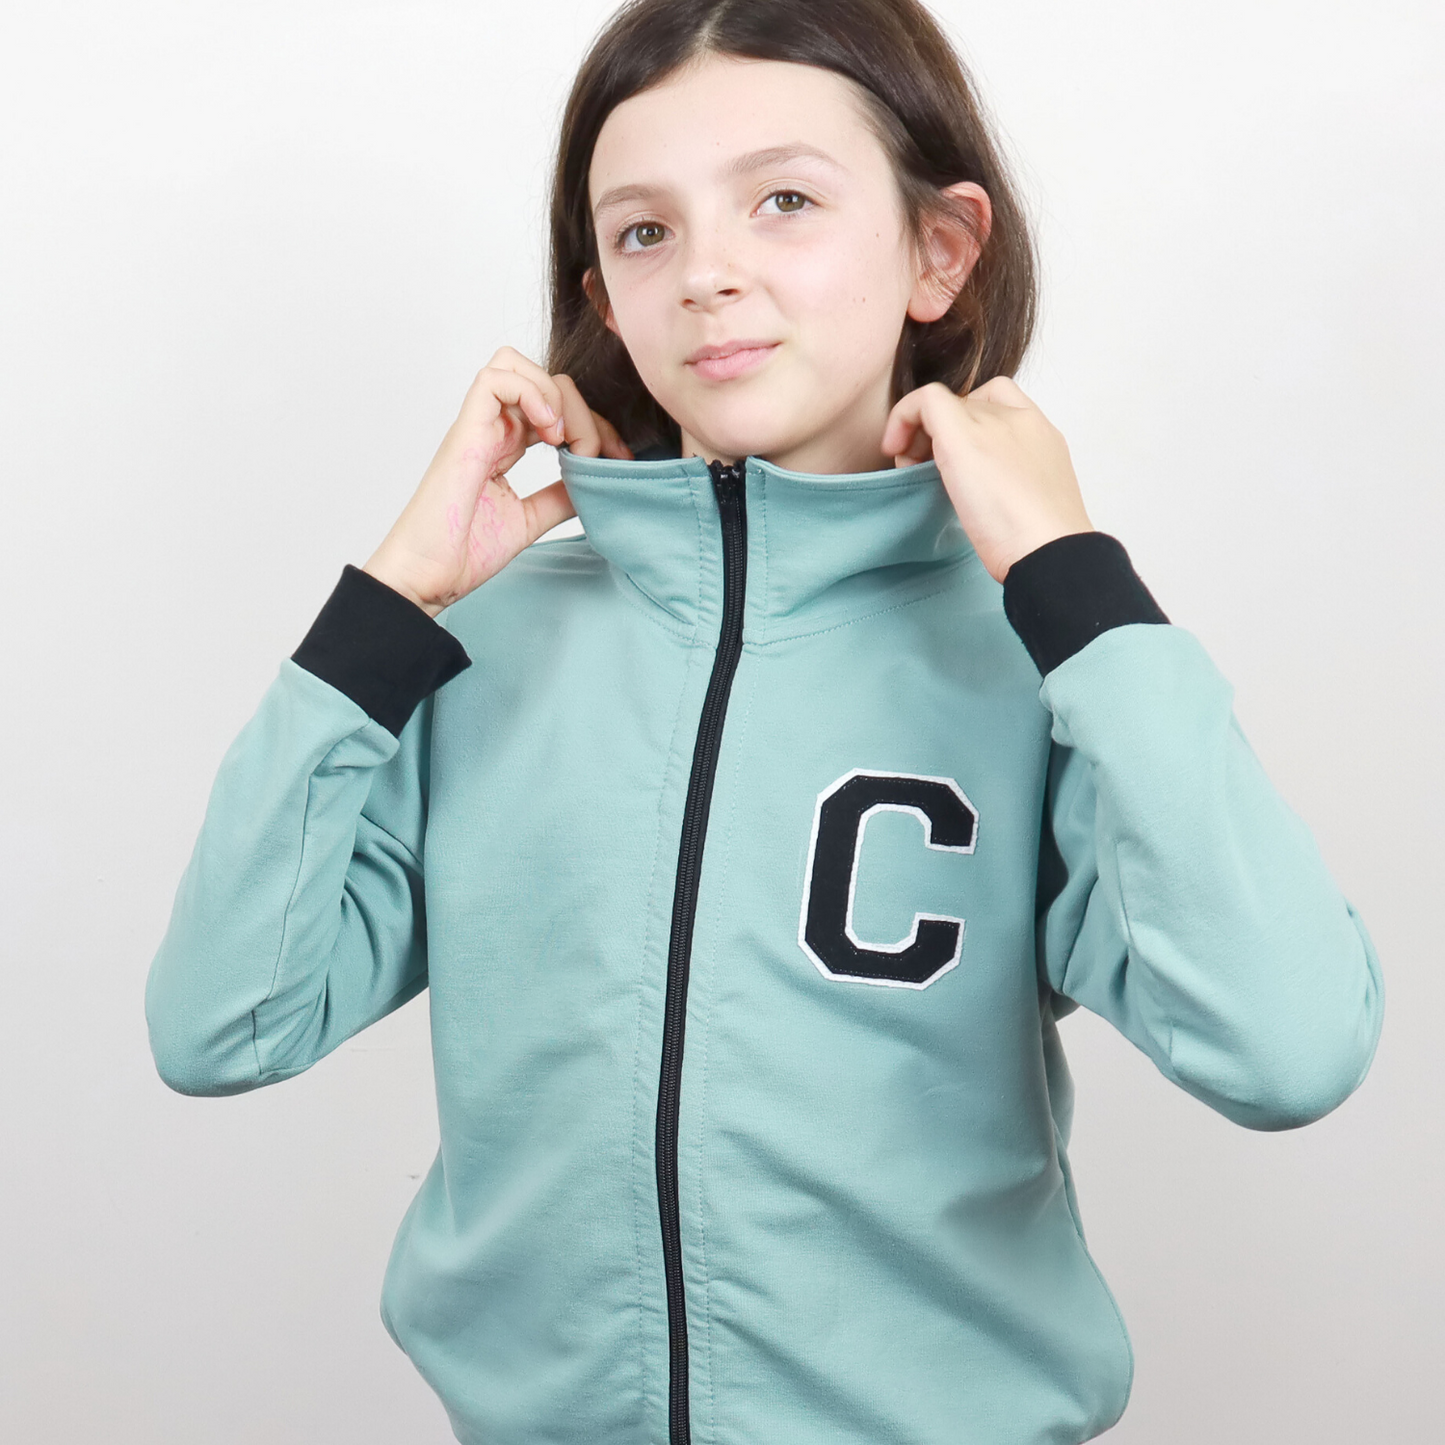 The Eat My Dust Track Jacket